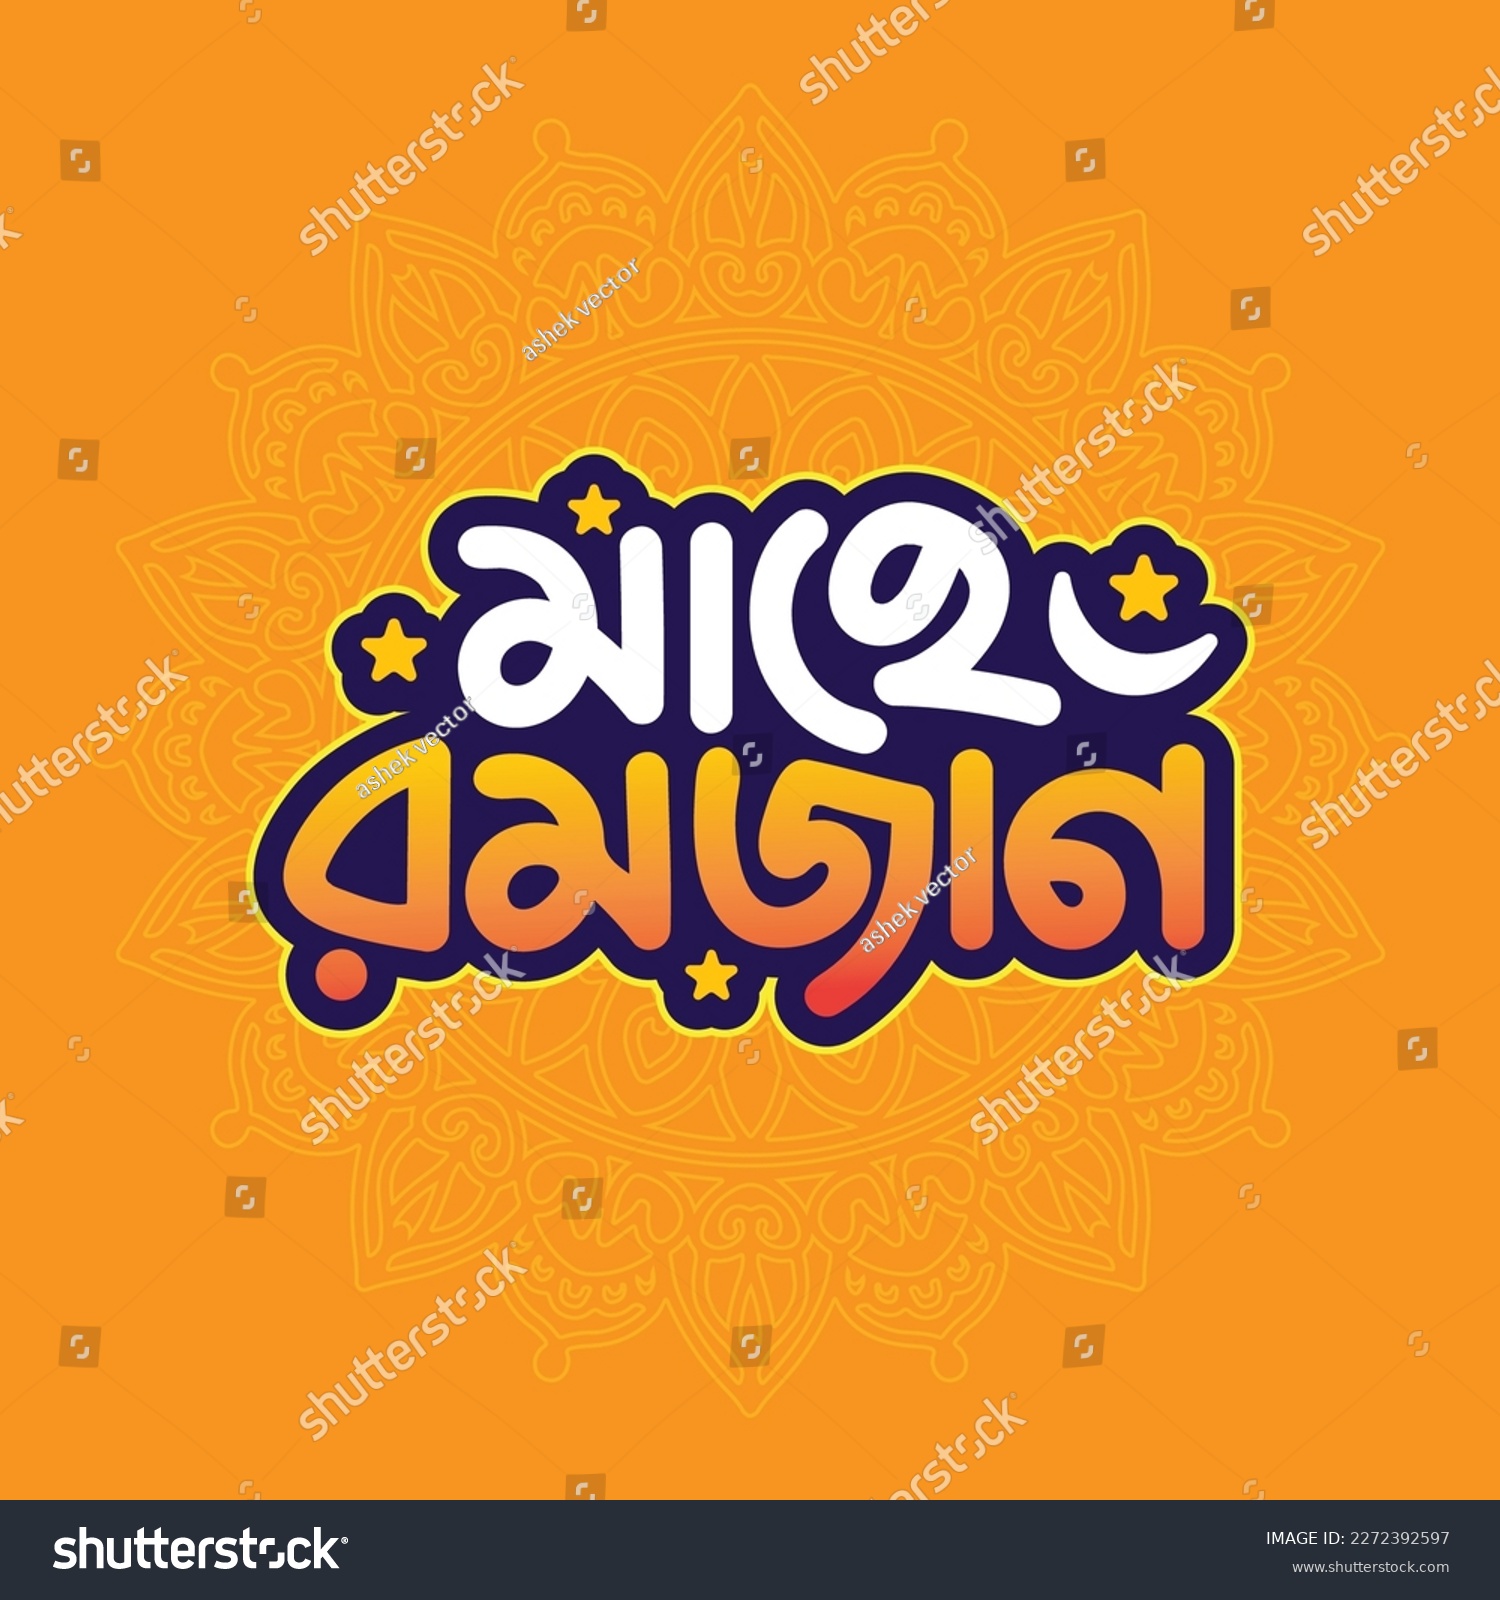 SVG of Ramadan Kareem Bangla typography and lettering vector illustration on a colorful mandala background for a Islamic religion festival. svg